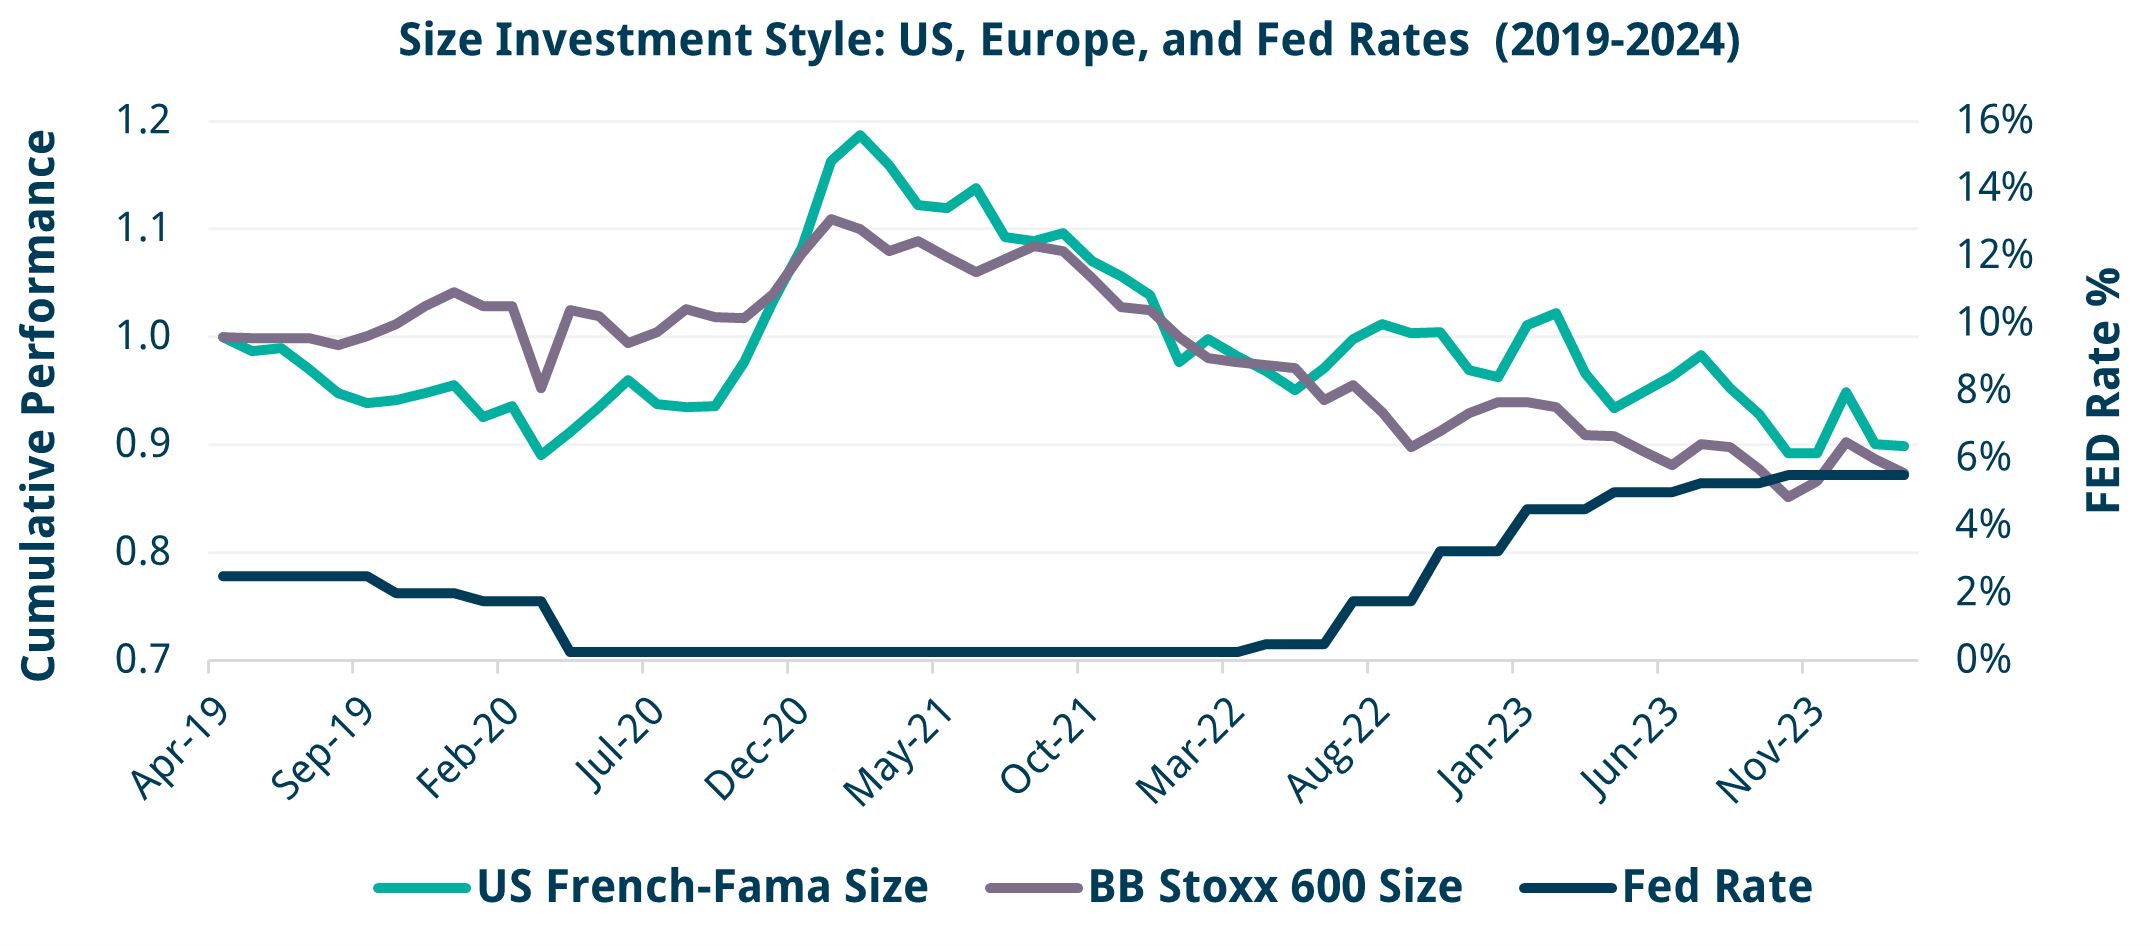 Size Investment Style: US, Europe, and Fed Rates 2019-2024